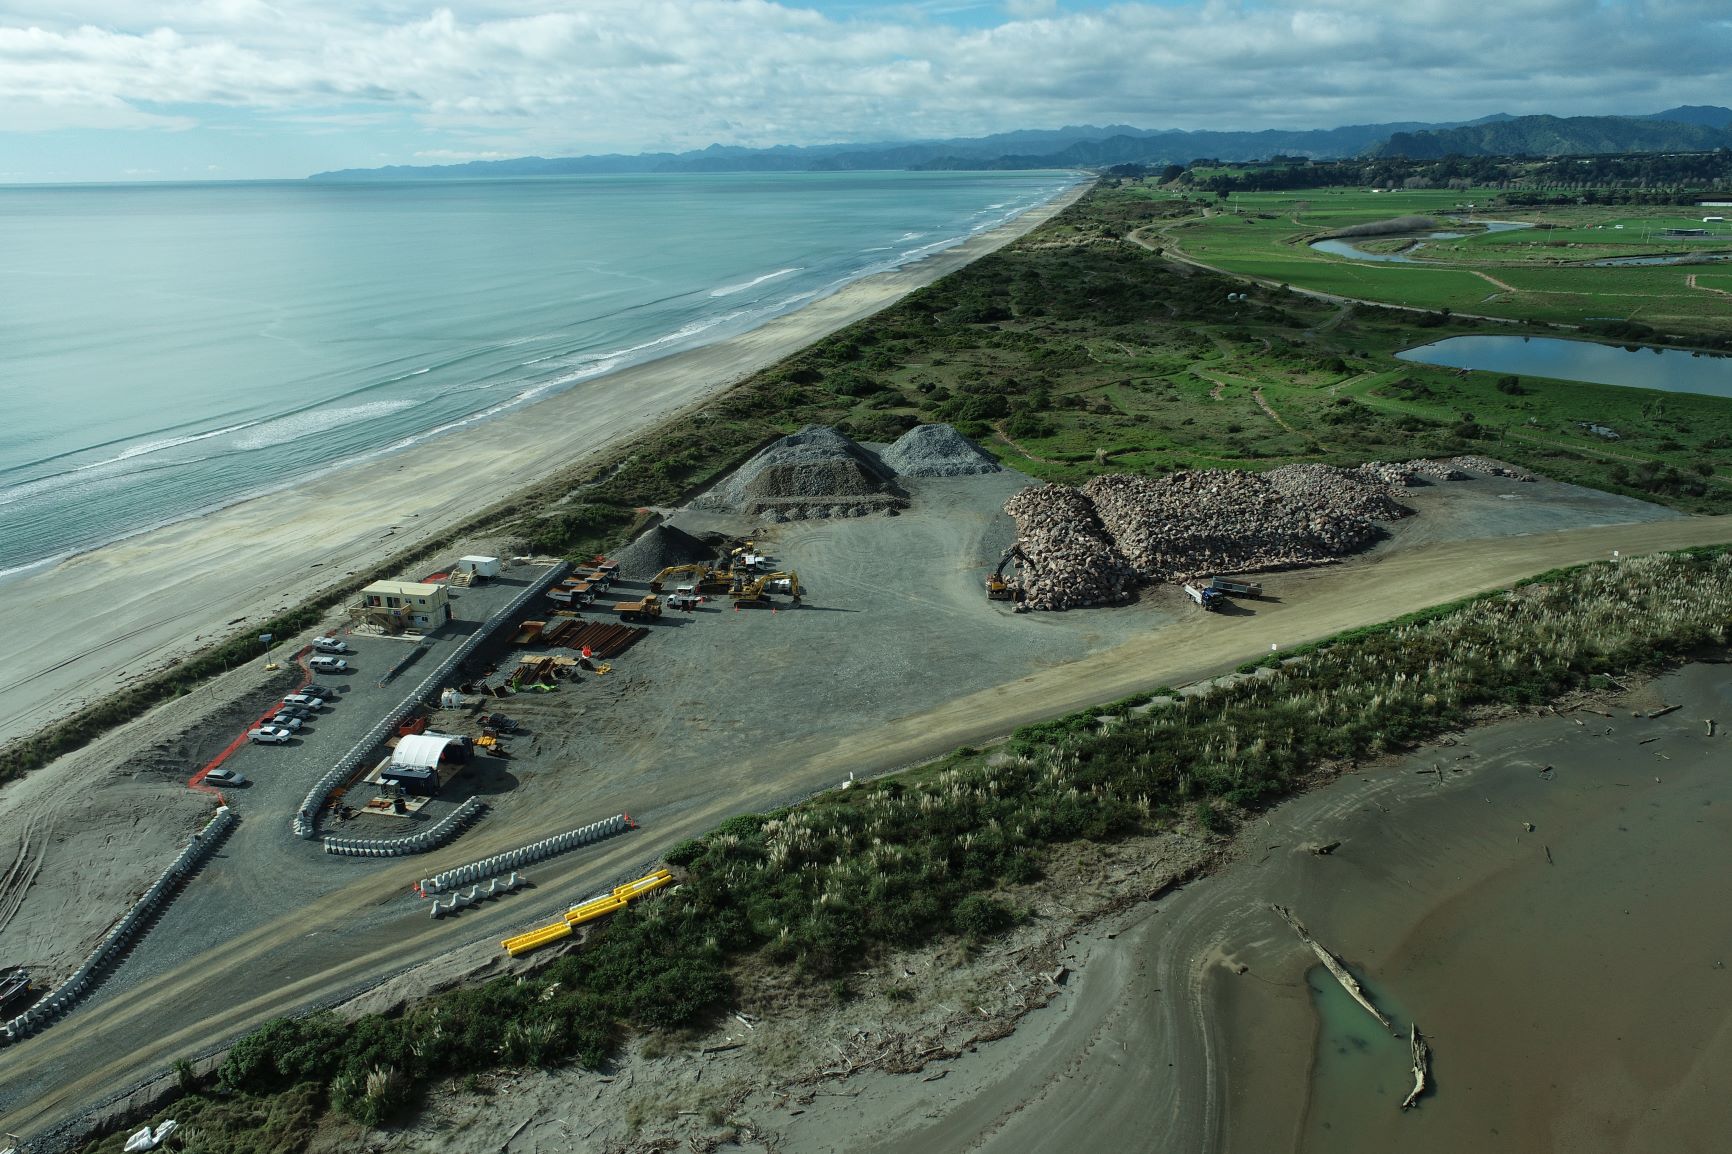 Image of Stockpiles at harbour development site July 2021